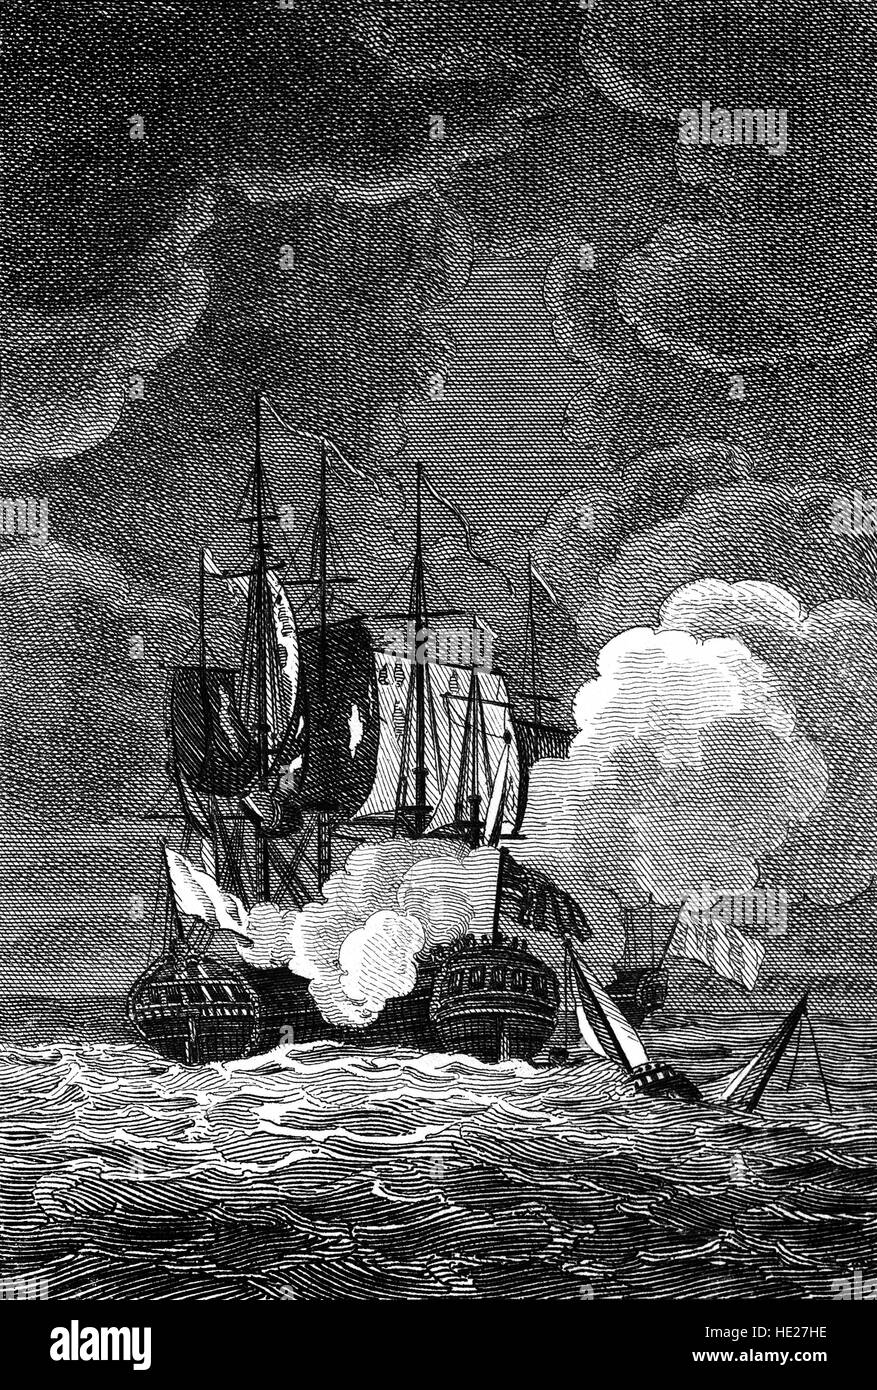 On 23 December 1756, the first year of the Seven Years' War, the British privateer 'Terrible', met the French  privateer 'Vengeance. The 'Vengeance' sailed towards the 'Terrible' under an English Ensign but hoisted the French colours when she came near and  battle commenced. Interestingly, the 'Terrible' was equipped at Execution Dock, commanded by Captain Death, Lieutenant Devil, and had a surgeon named Ghost! Stock Photo